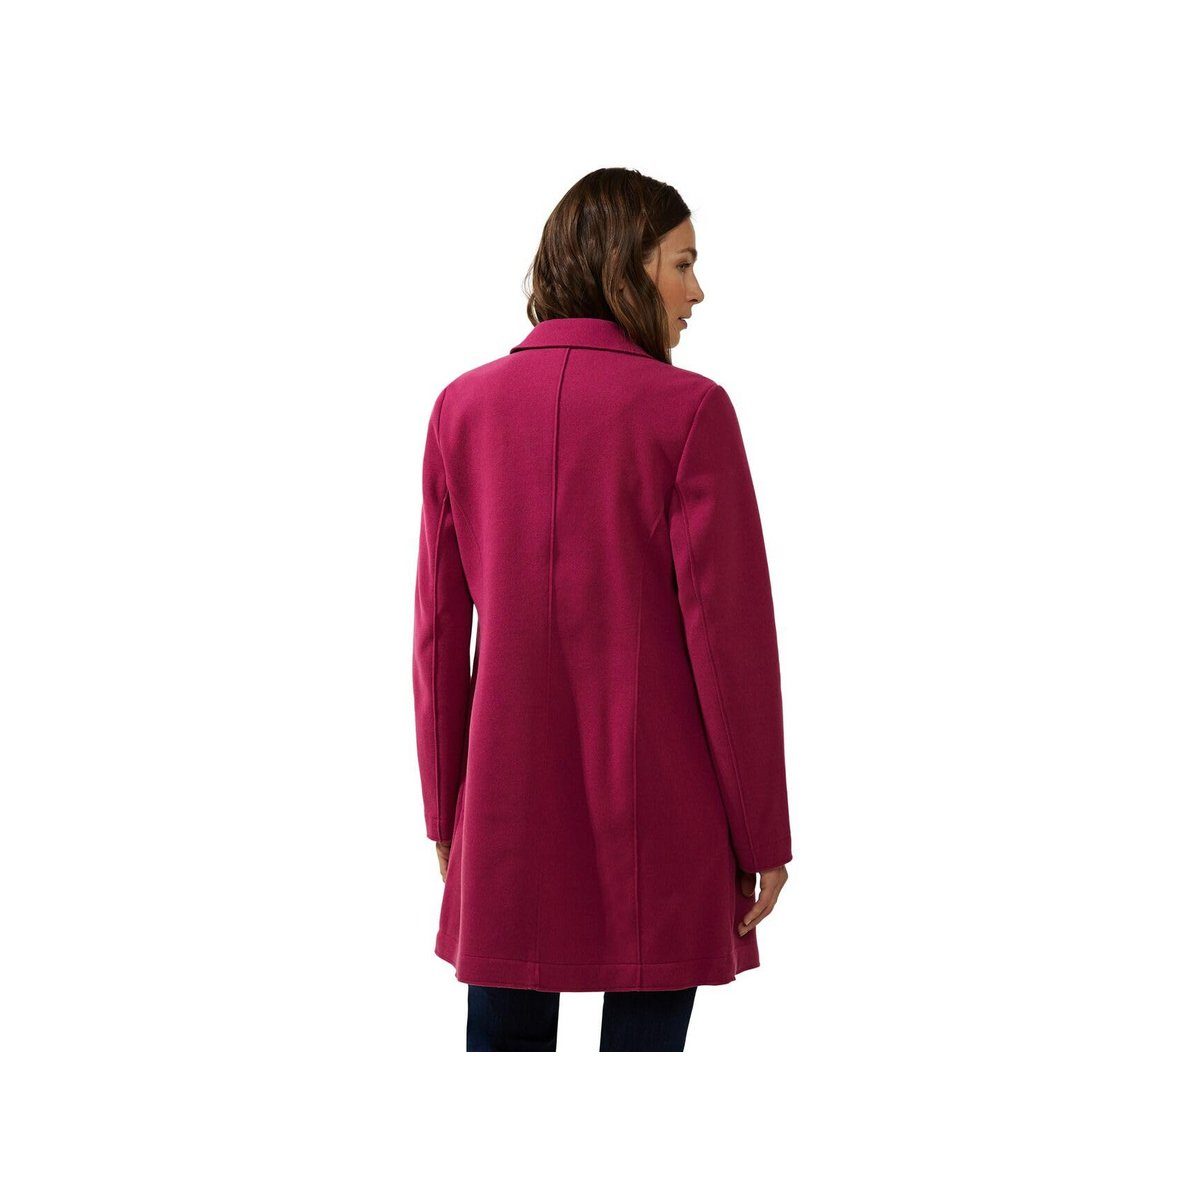 STREET ONE Outdoorjacke rot passform red peony textil (1-St)